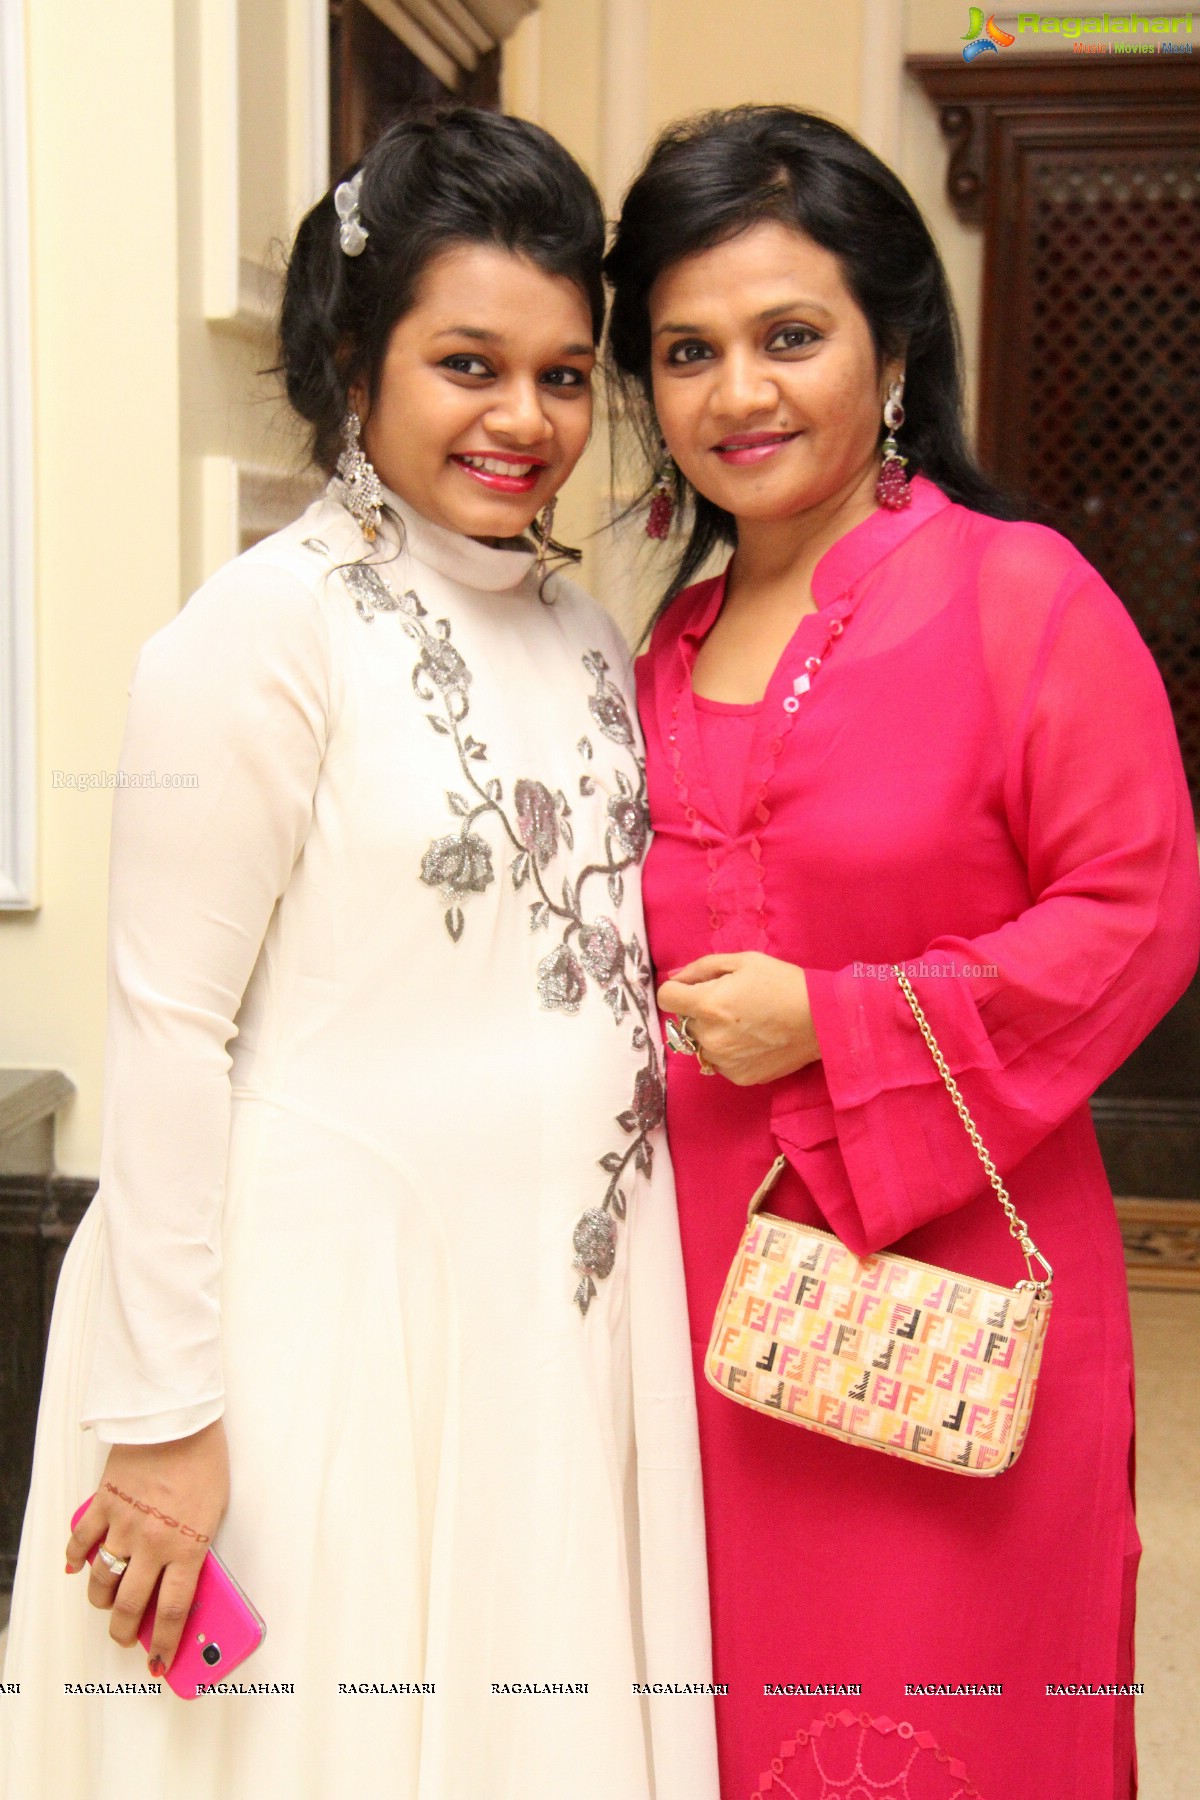 Archana Alok Jaju Family and Friends Lunch Party